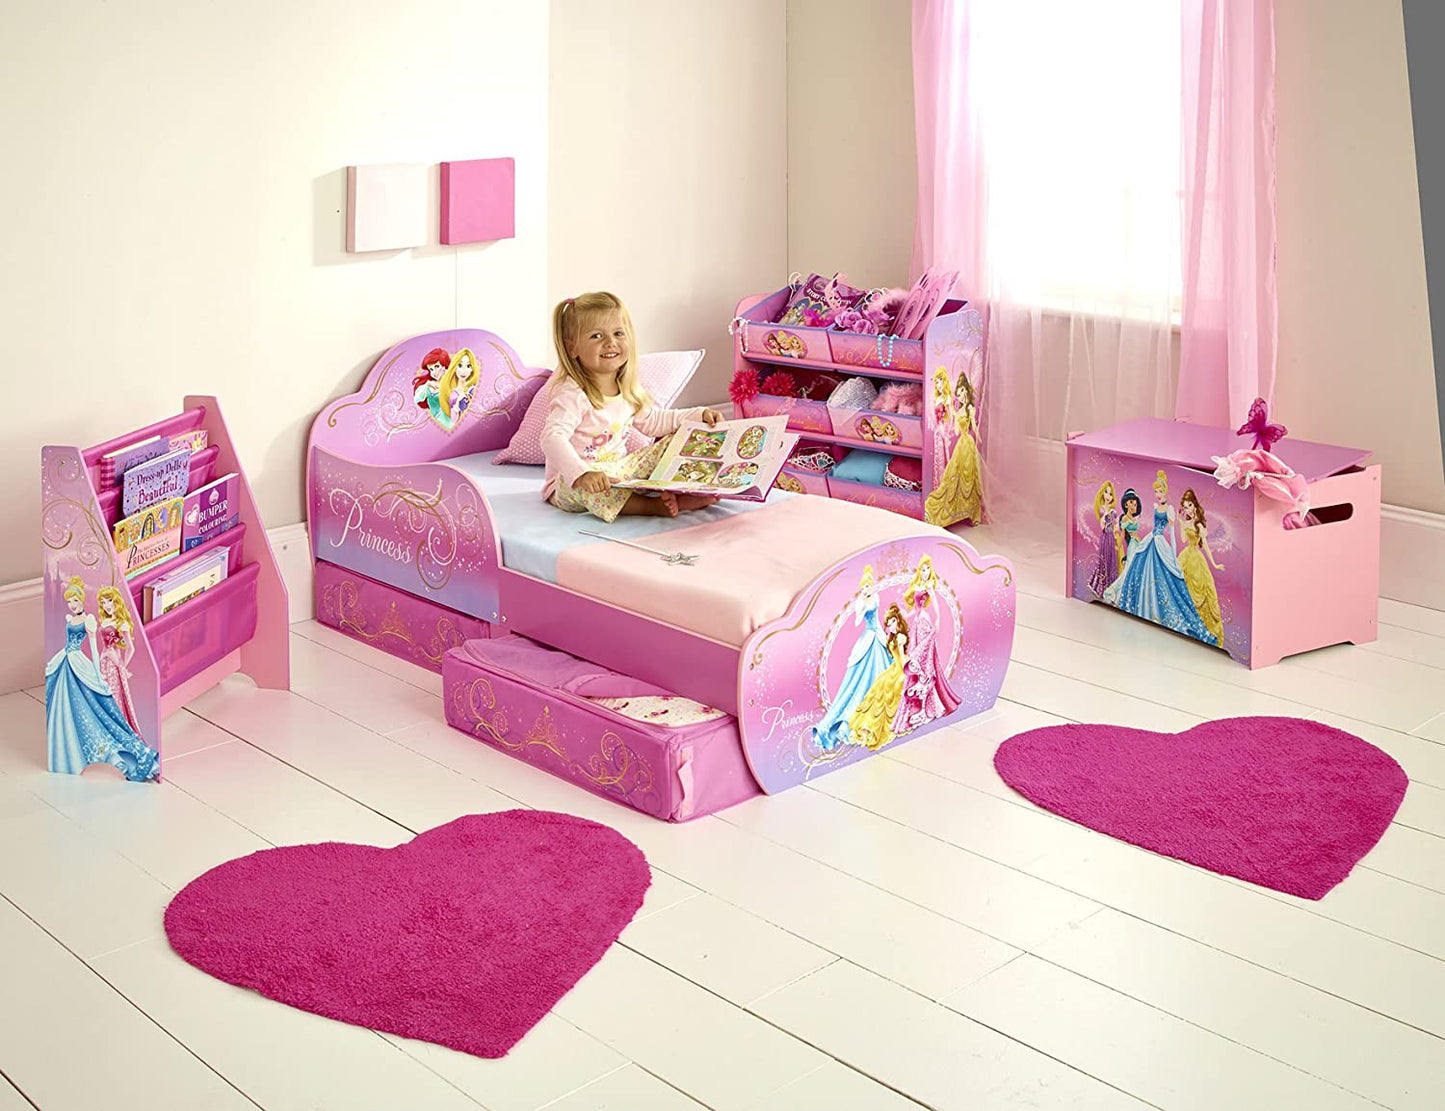 Kids Toddler Bed with Underbed Storage by Hellohome, Pink, 143.00X77.00X63.00 Cm